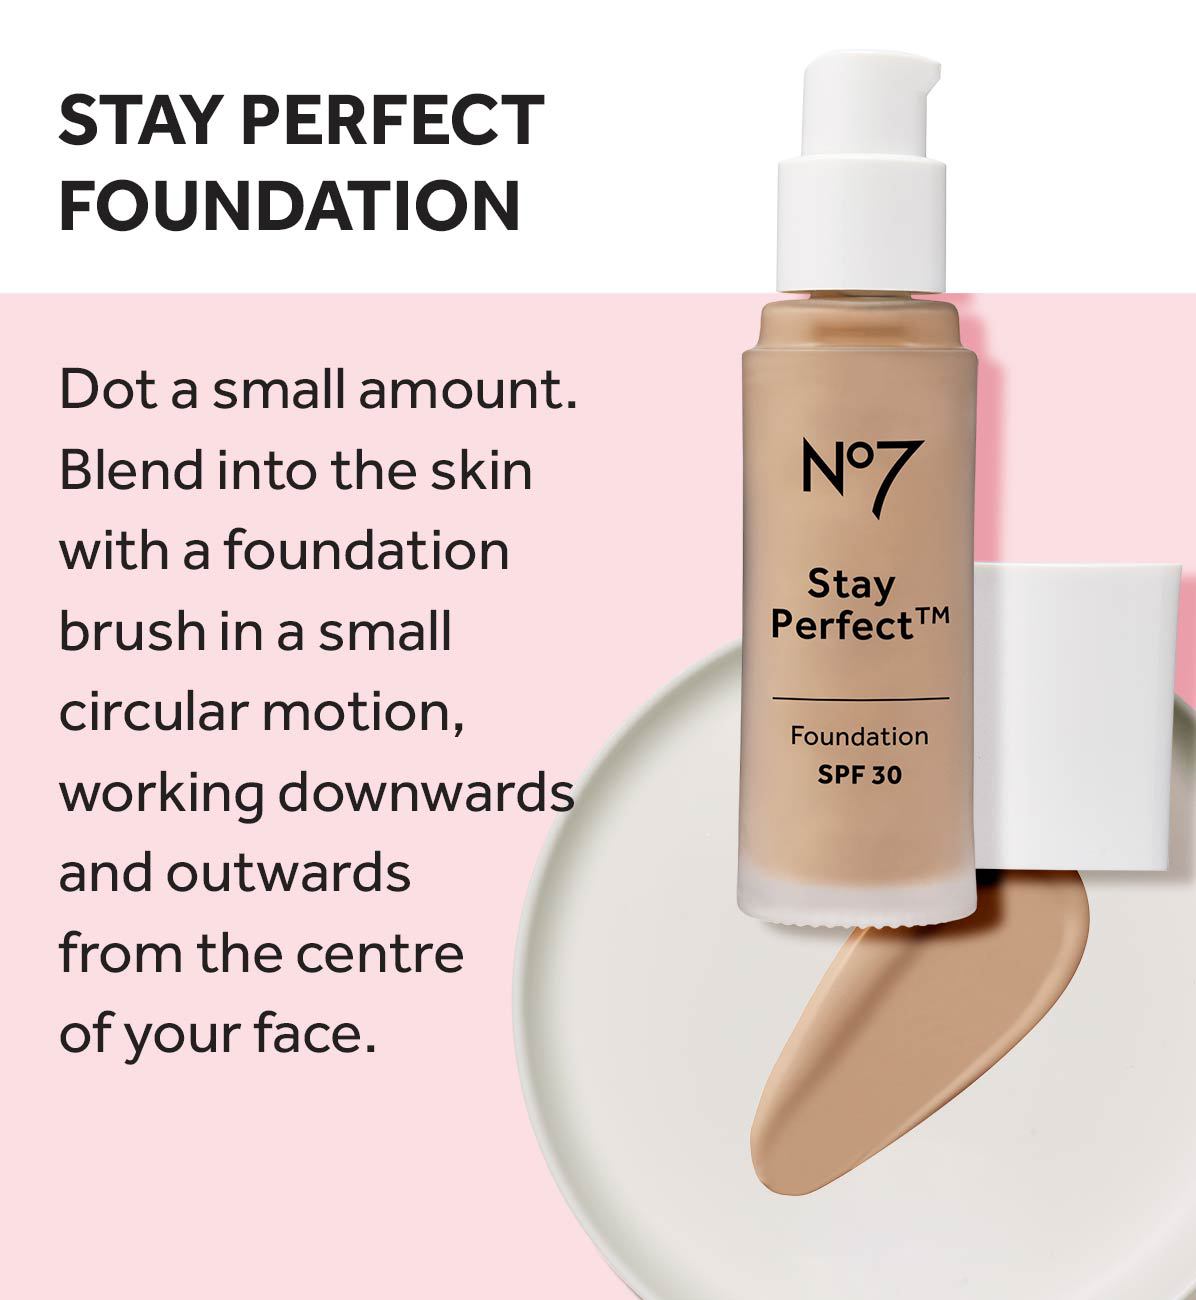 STAY PERFECT FOUNDATION Dot a small amount. Blend into the skin with a foundation brush in a small circular motion, working downwards and outwards from the centre of your face. N°7 Stay Perfect TM Foundation SPF 30